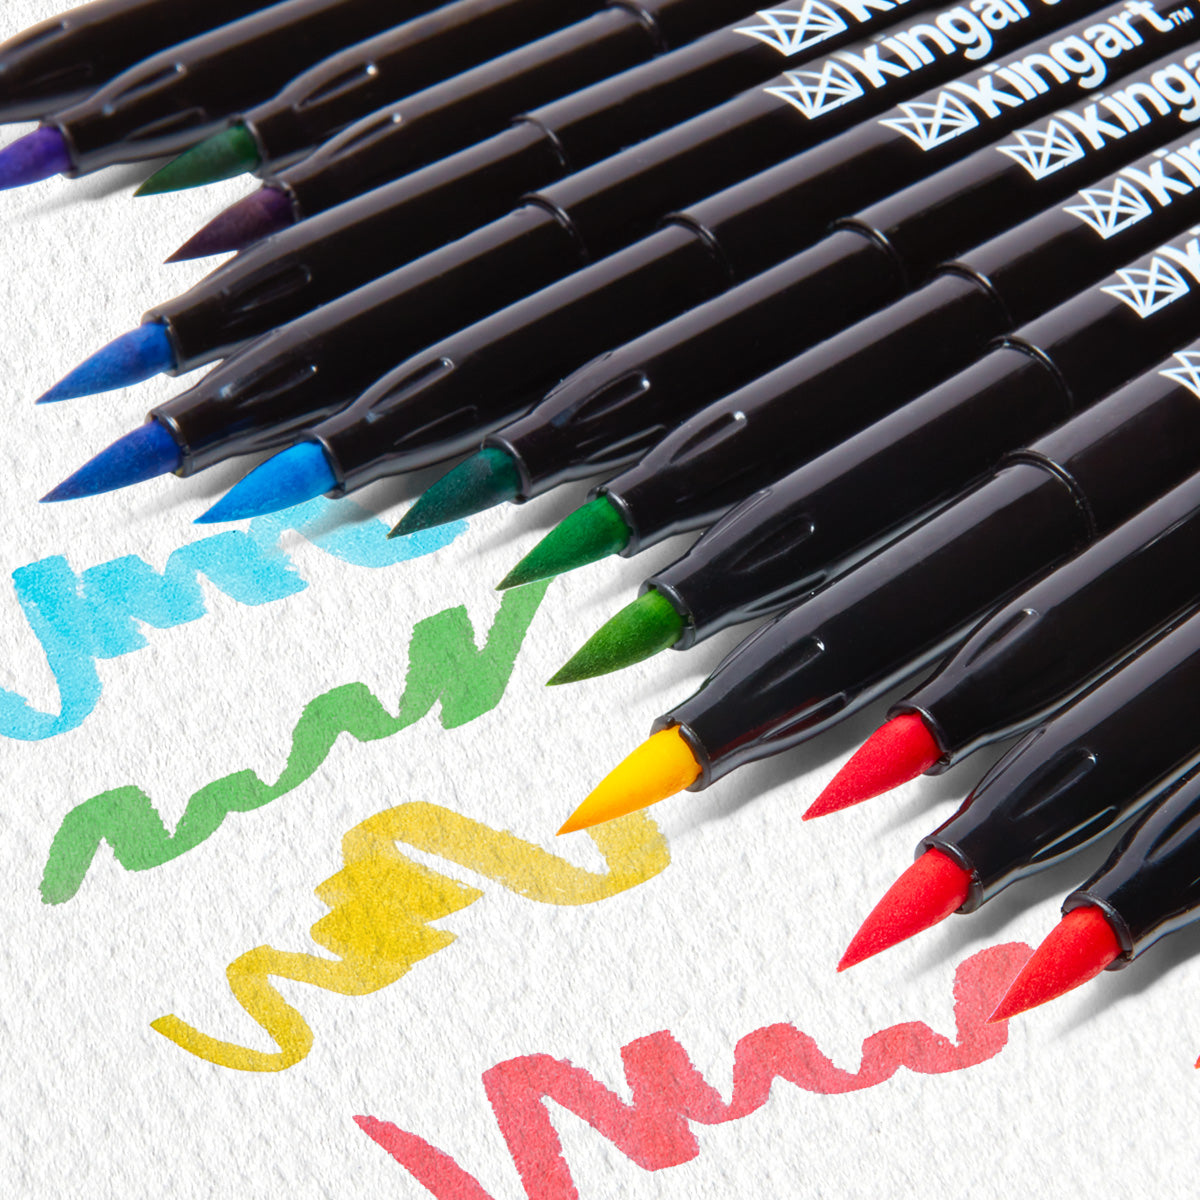  KINGART PRO Coloring Brush Pen Watercolor Markers, in 48 Vivid  Colors with Blendable Ink for Fine, Medium, or Bold Brush Strokes